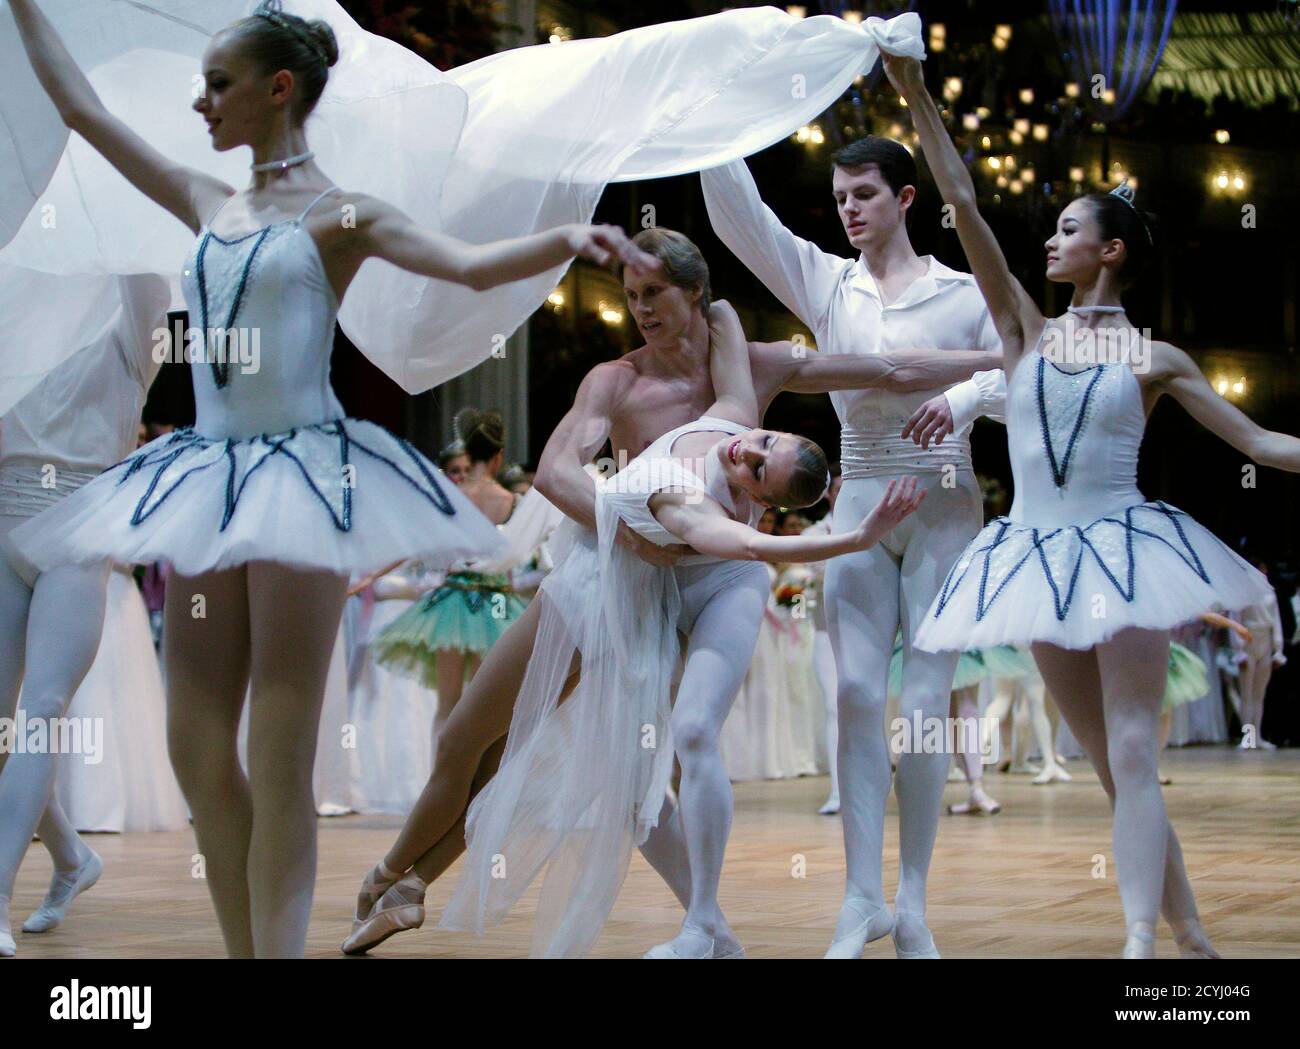 Dancers of the state opera ballett perform during the opening ceremony of  the traditional Opera Ball (Opernball) in Vienna, February 16, 2012.  REUTERS/Lisi Niesner (AUSTRIA - Tags: ENTERTAINMENT SOCIETY Stock Photo -  Alamy